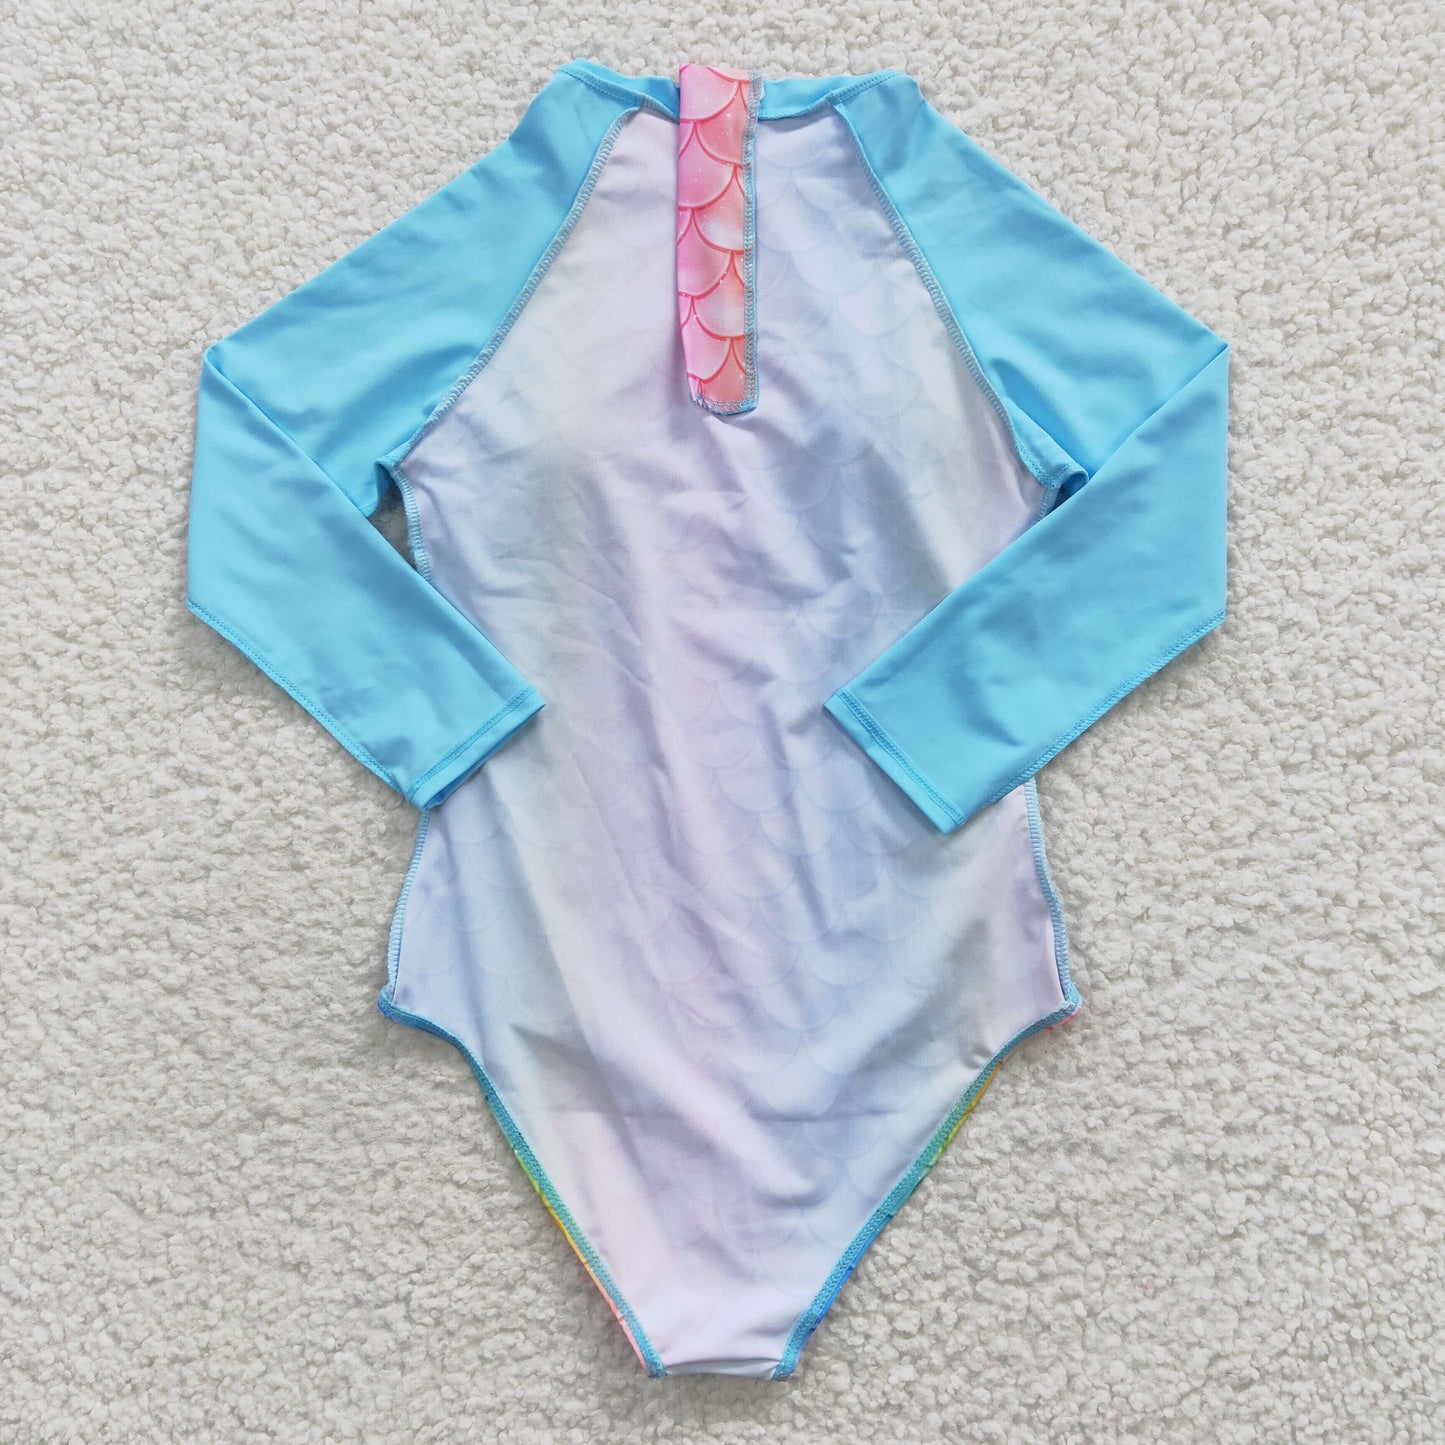 S0075 Girls Colorful Scale One-piece Swimsuit